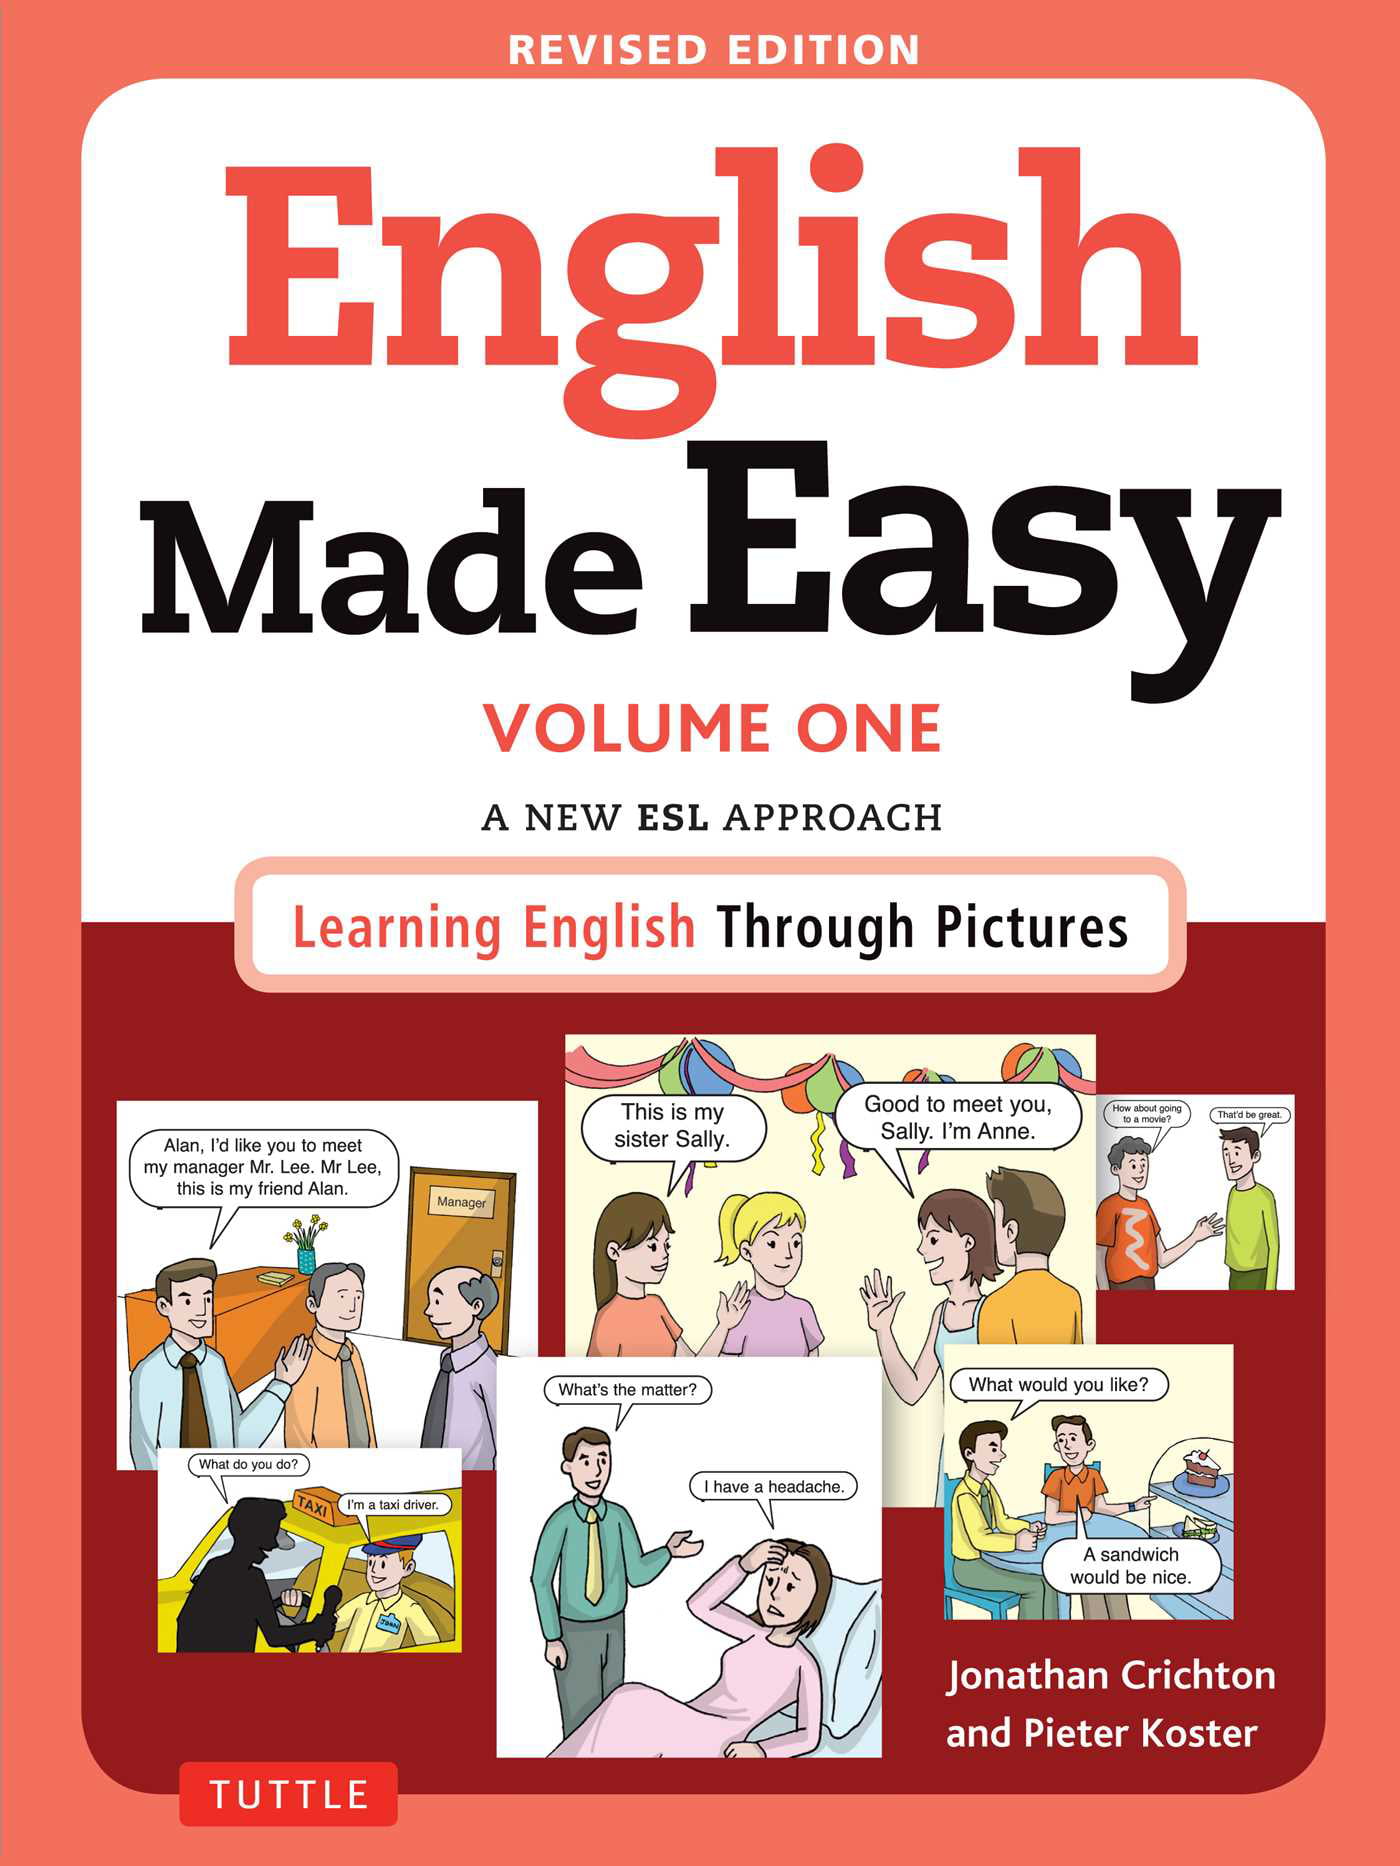 english-made-easy-volume-one-a-new-esl-approach-learning-english-through-pictures-walmart